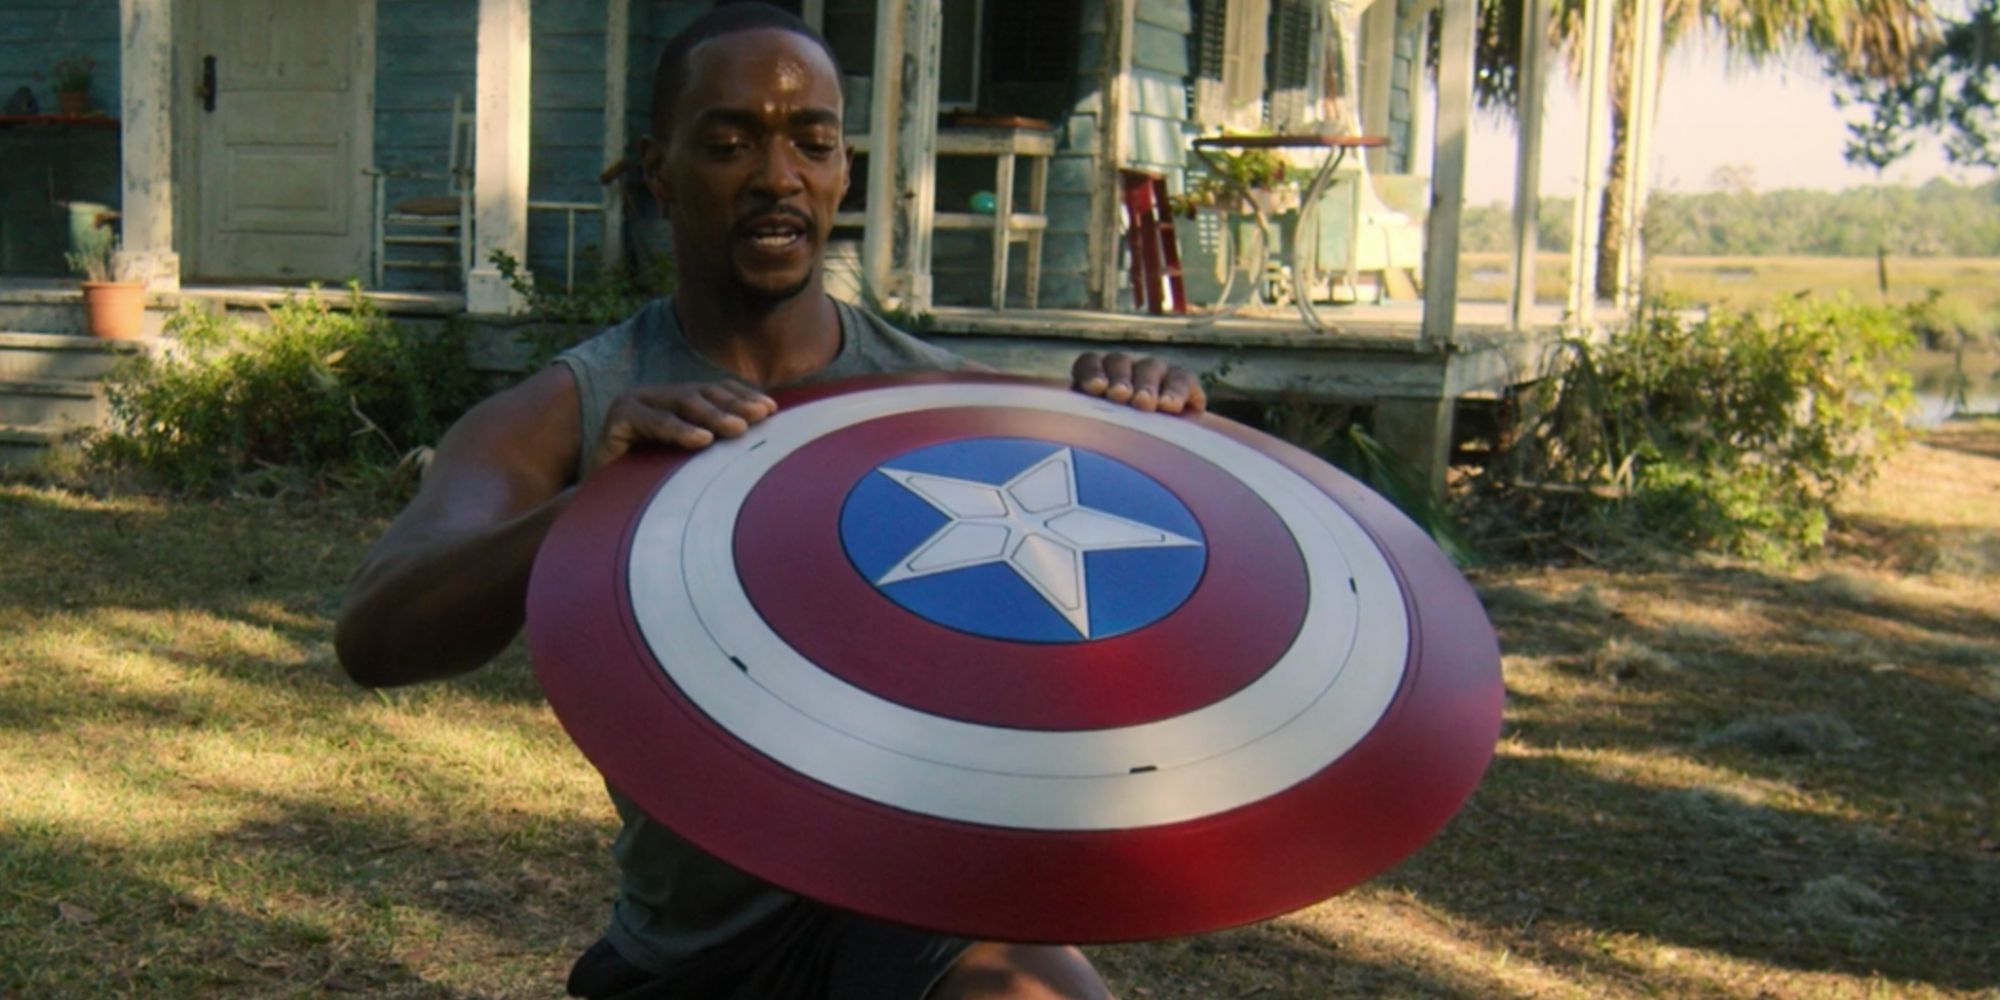 Sam Wilson training with the Shield in Falcon and the Winter Soldier